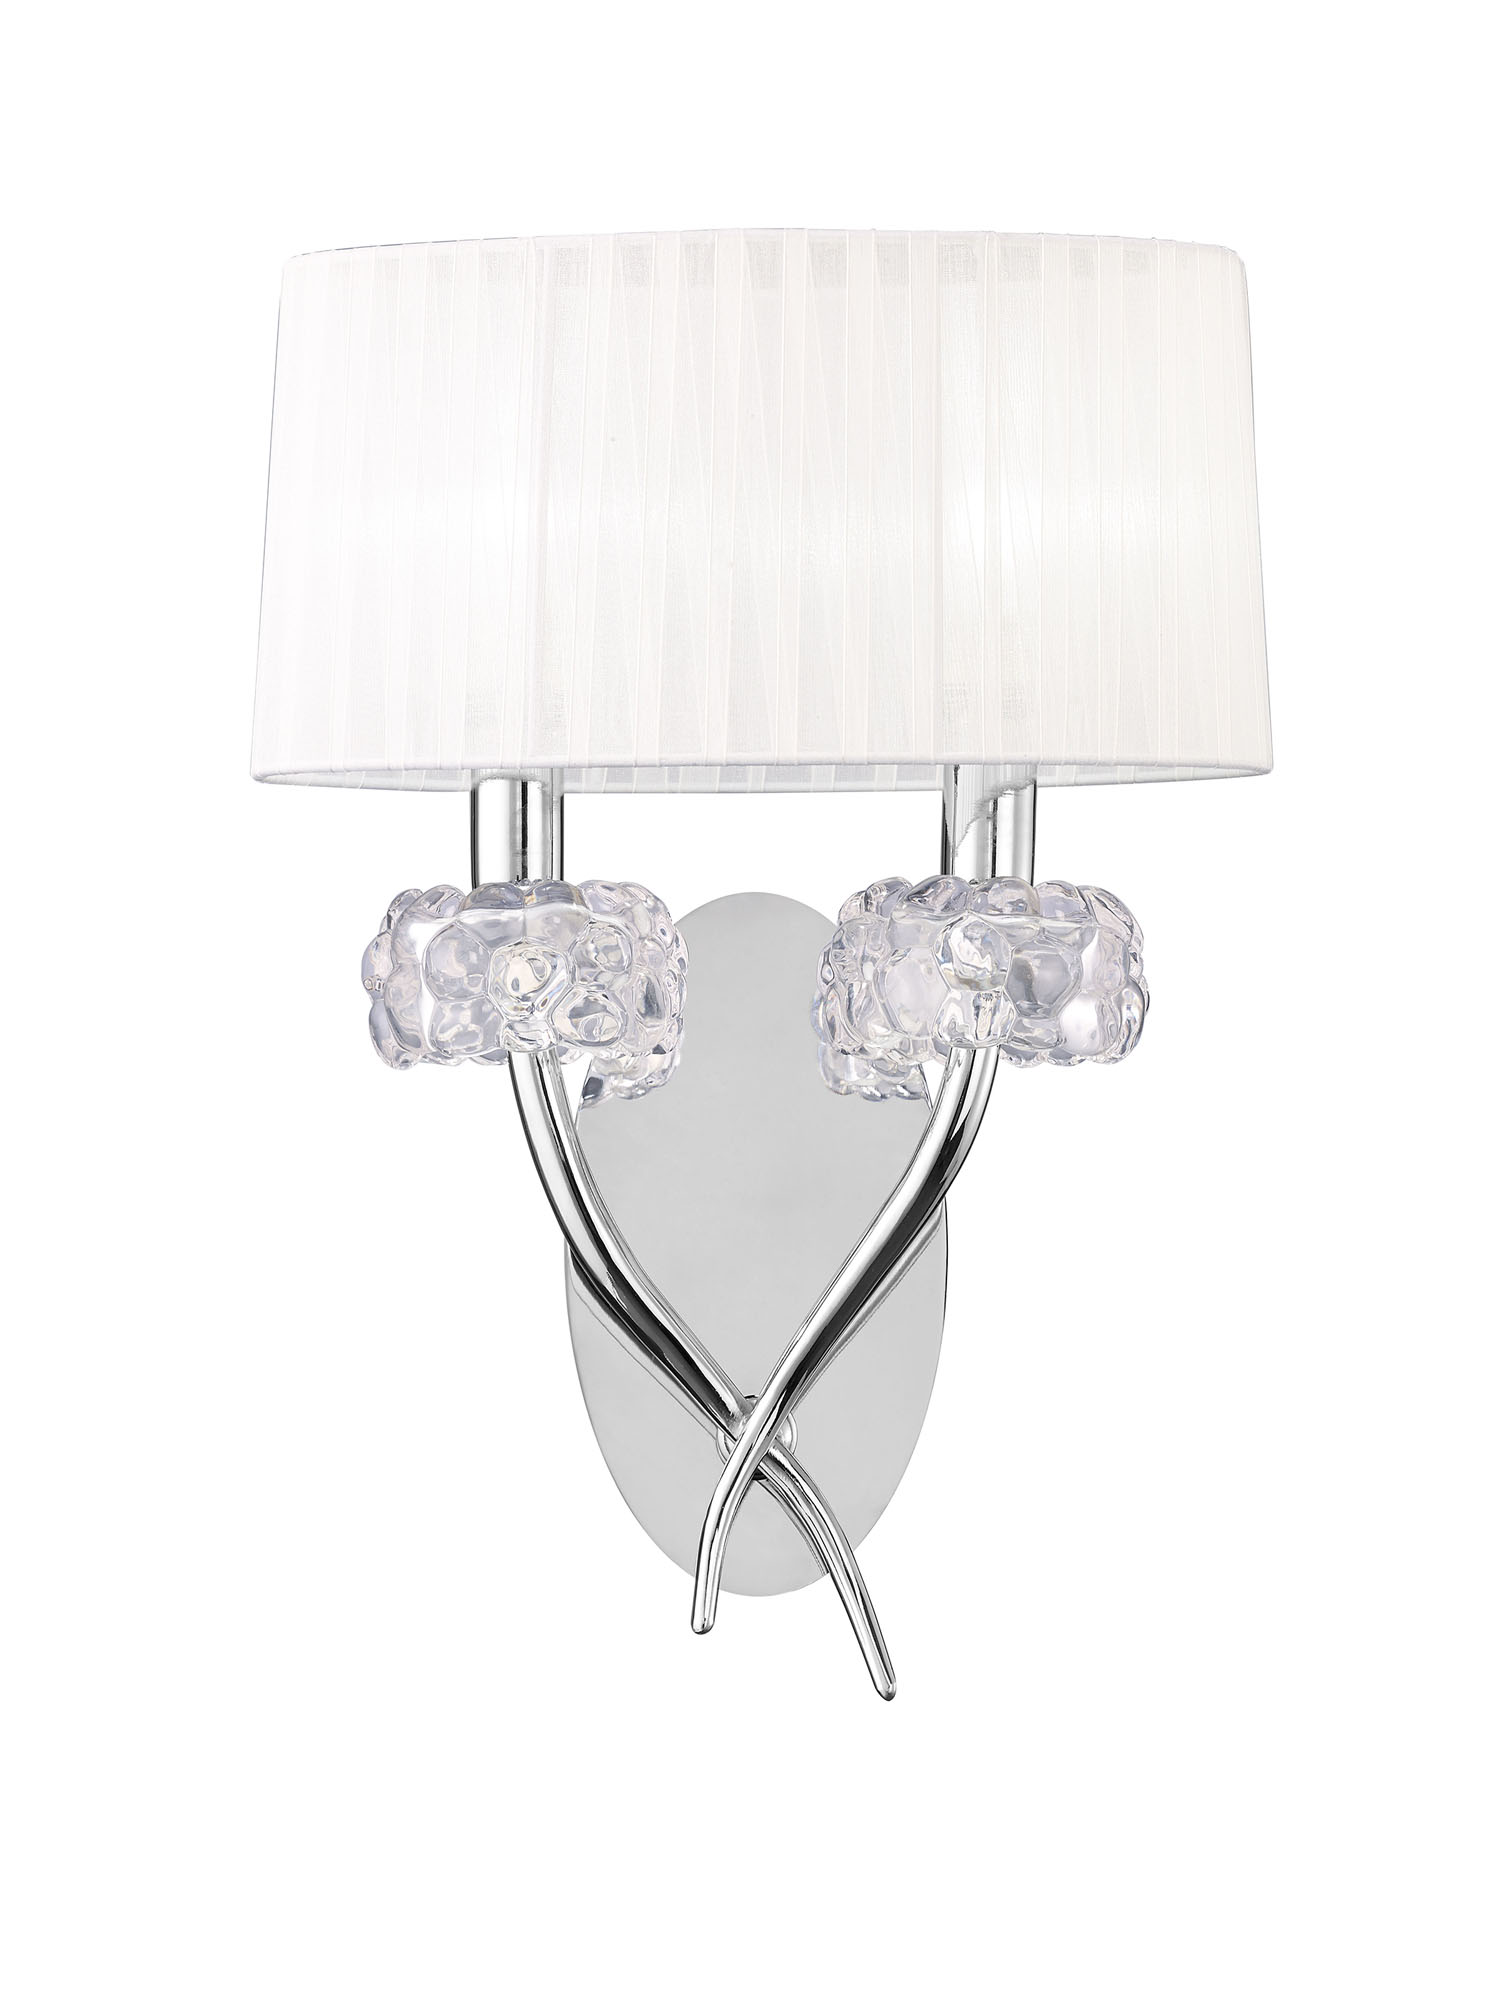 M4634/S  Loewe Switched Wall Lamp 2 Light